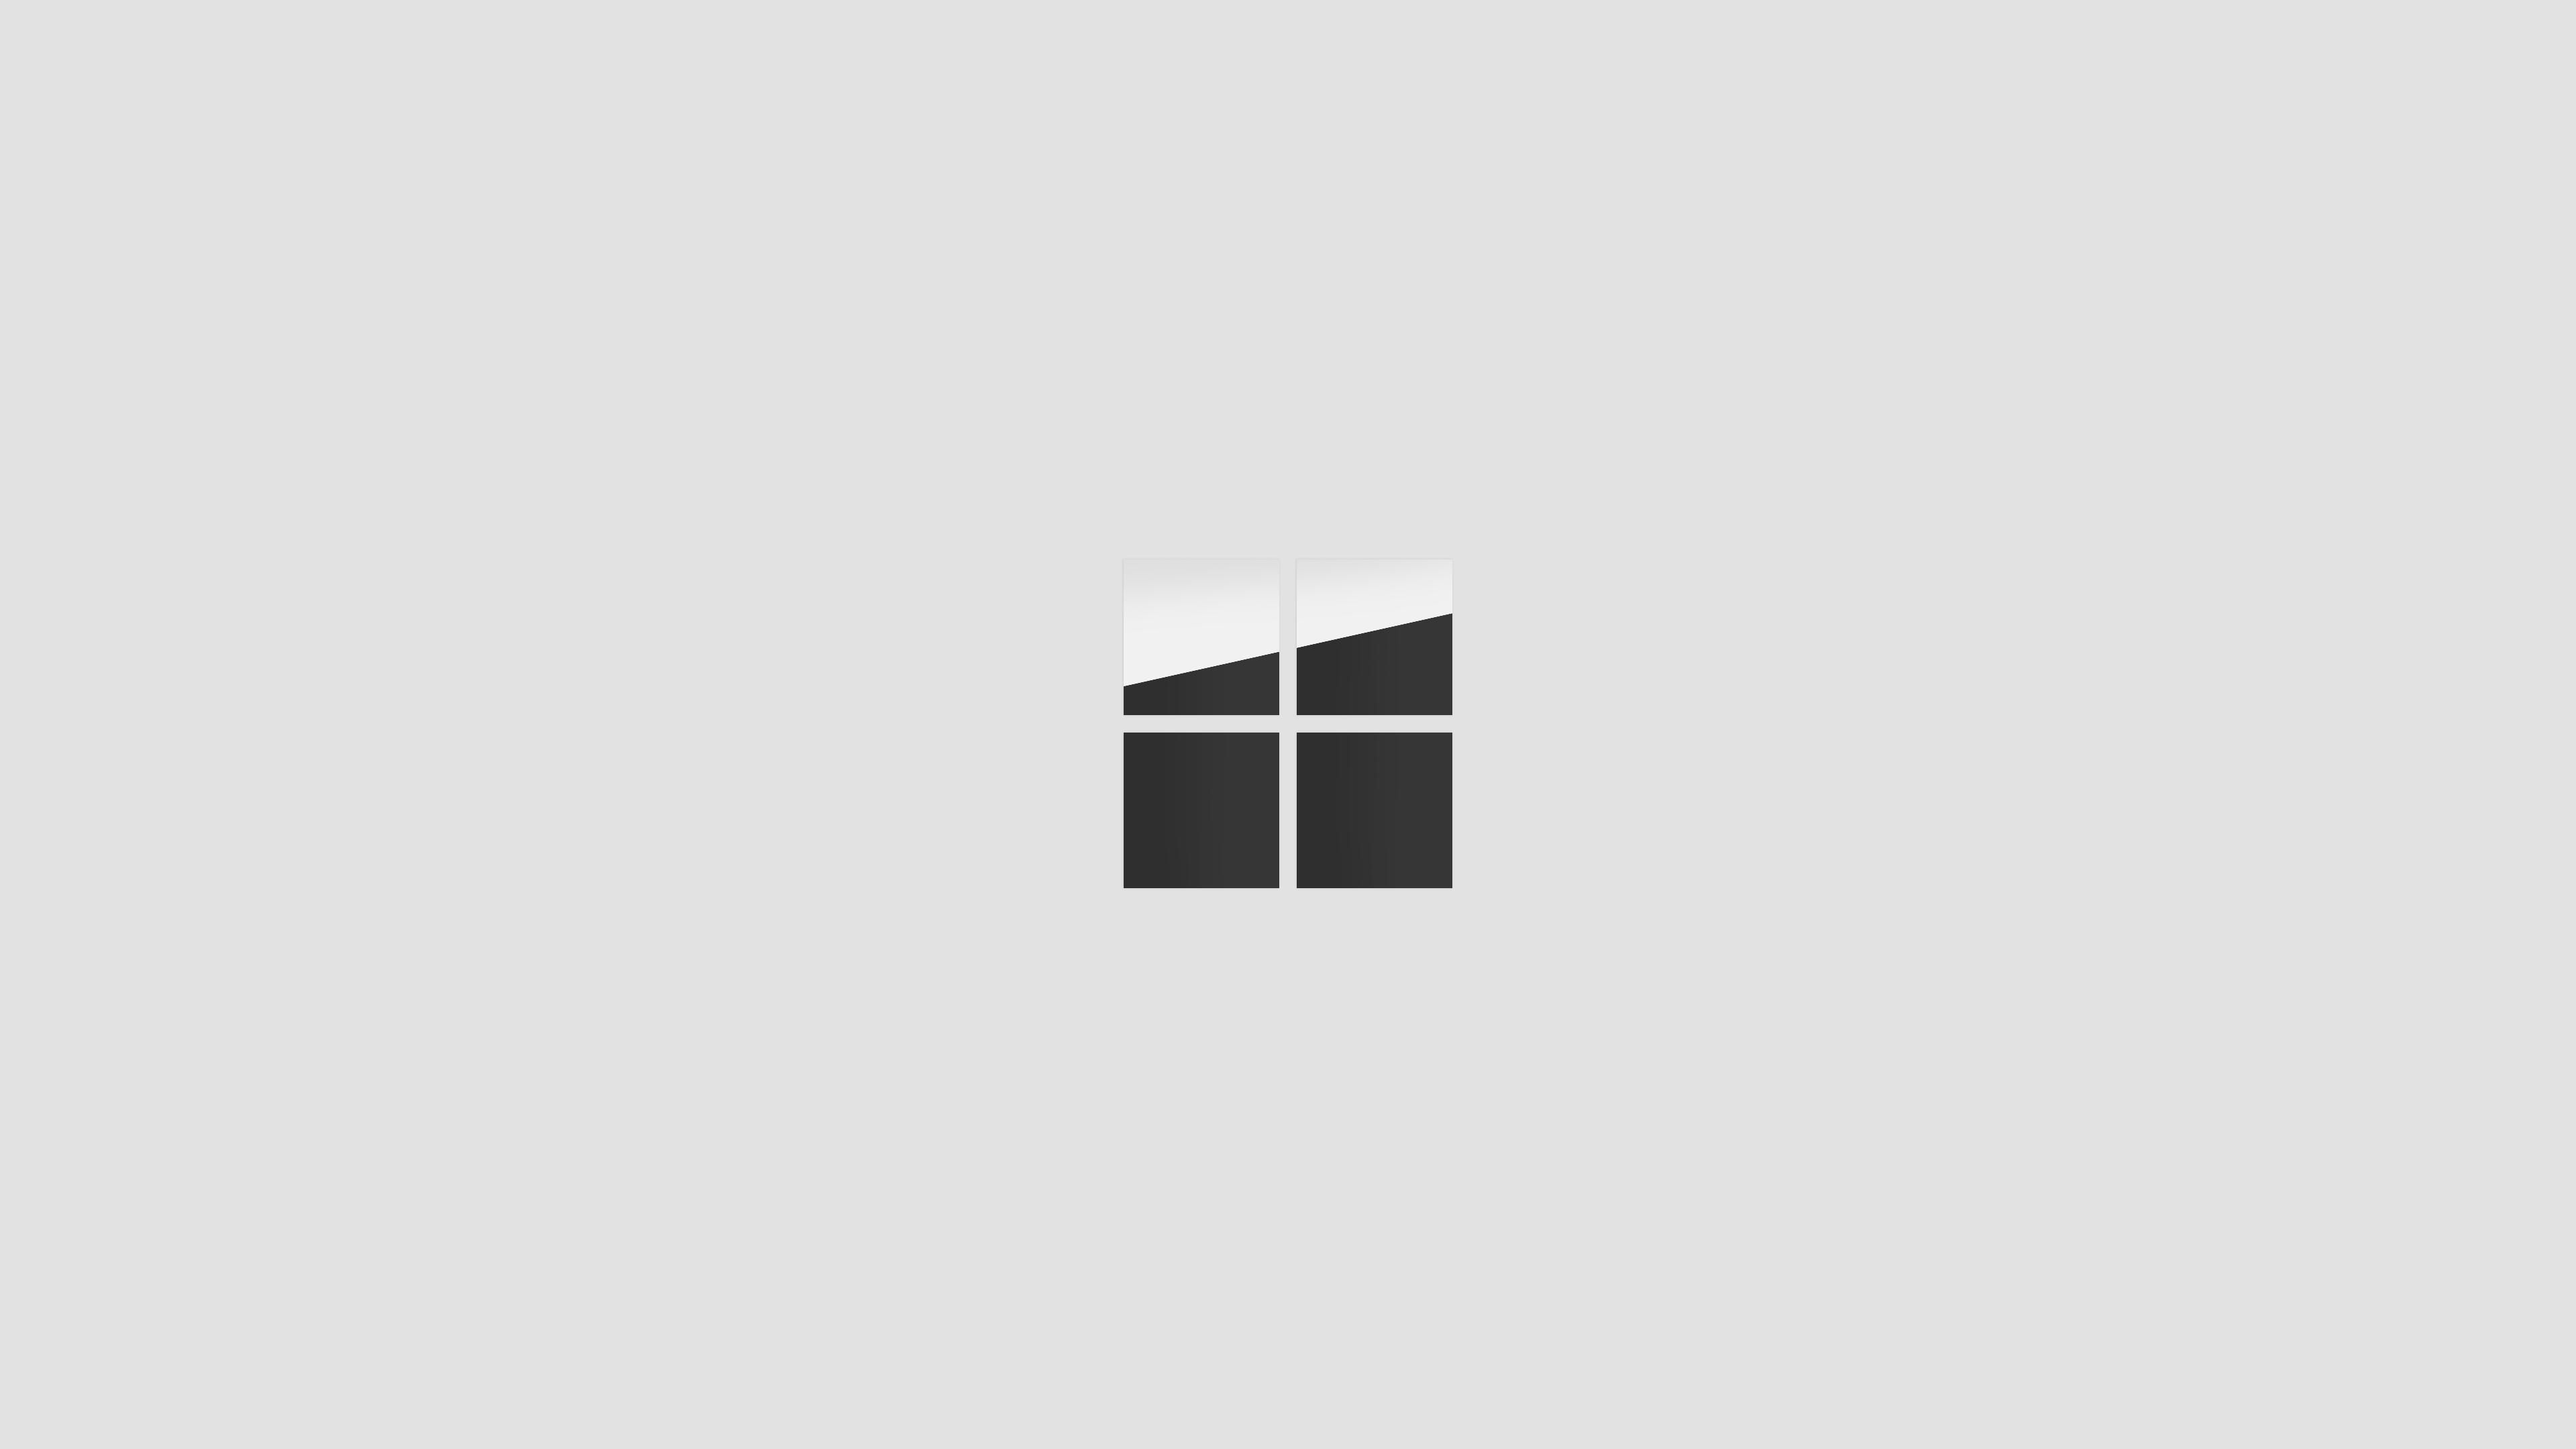 Wallpaper Have made a 4K adapted version of Microsoft Surface logo